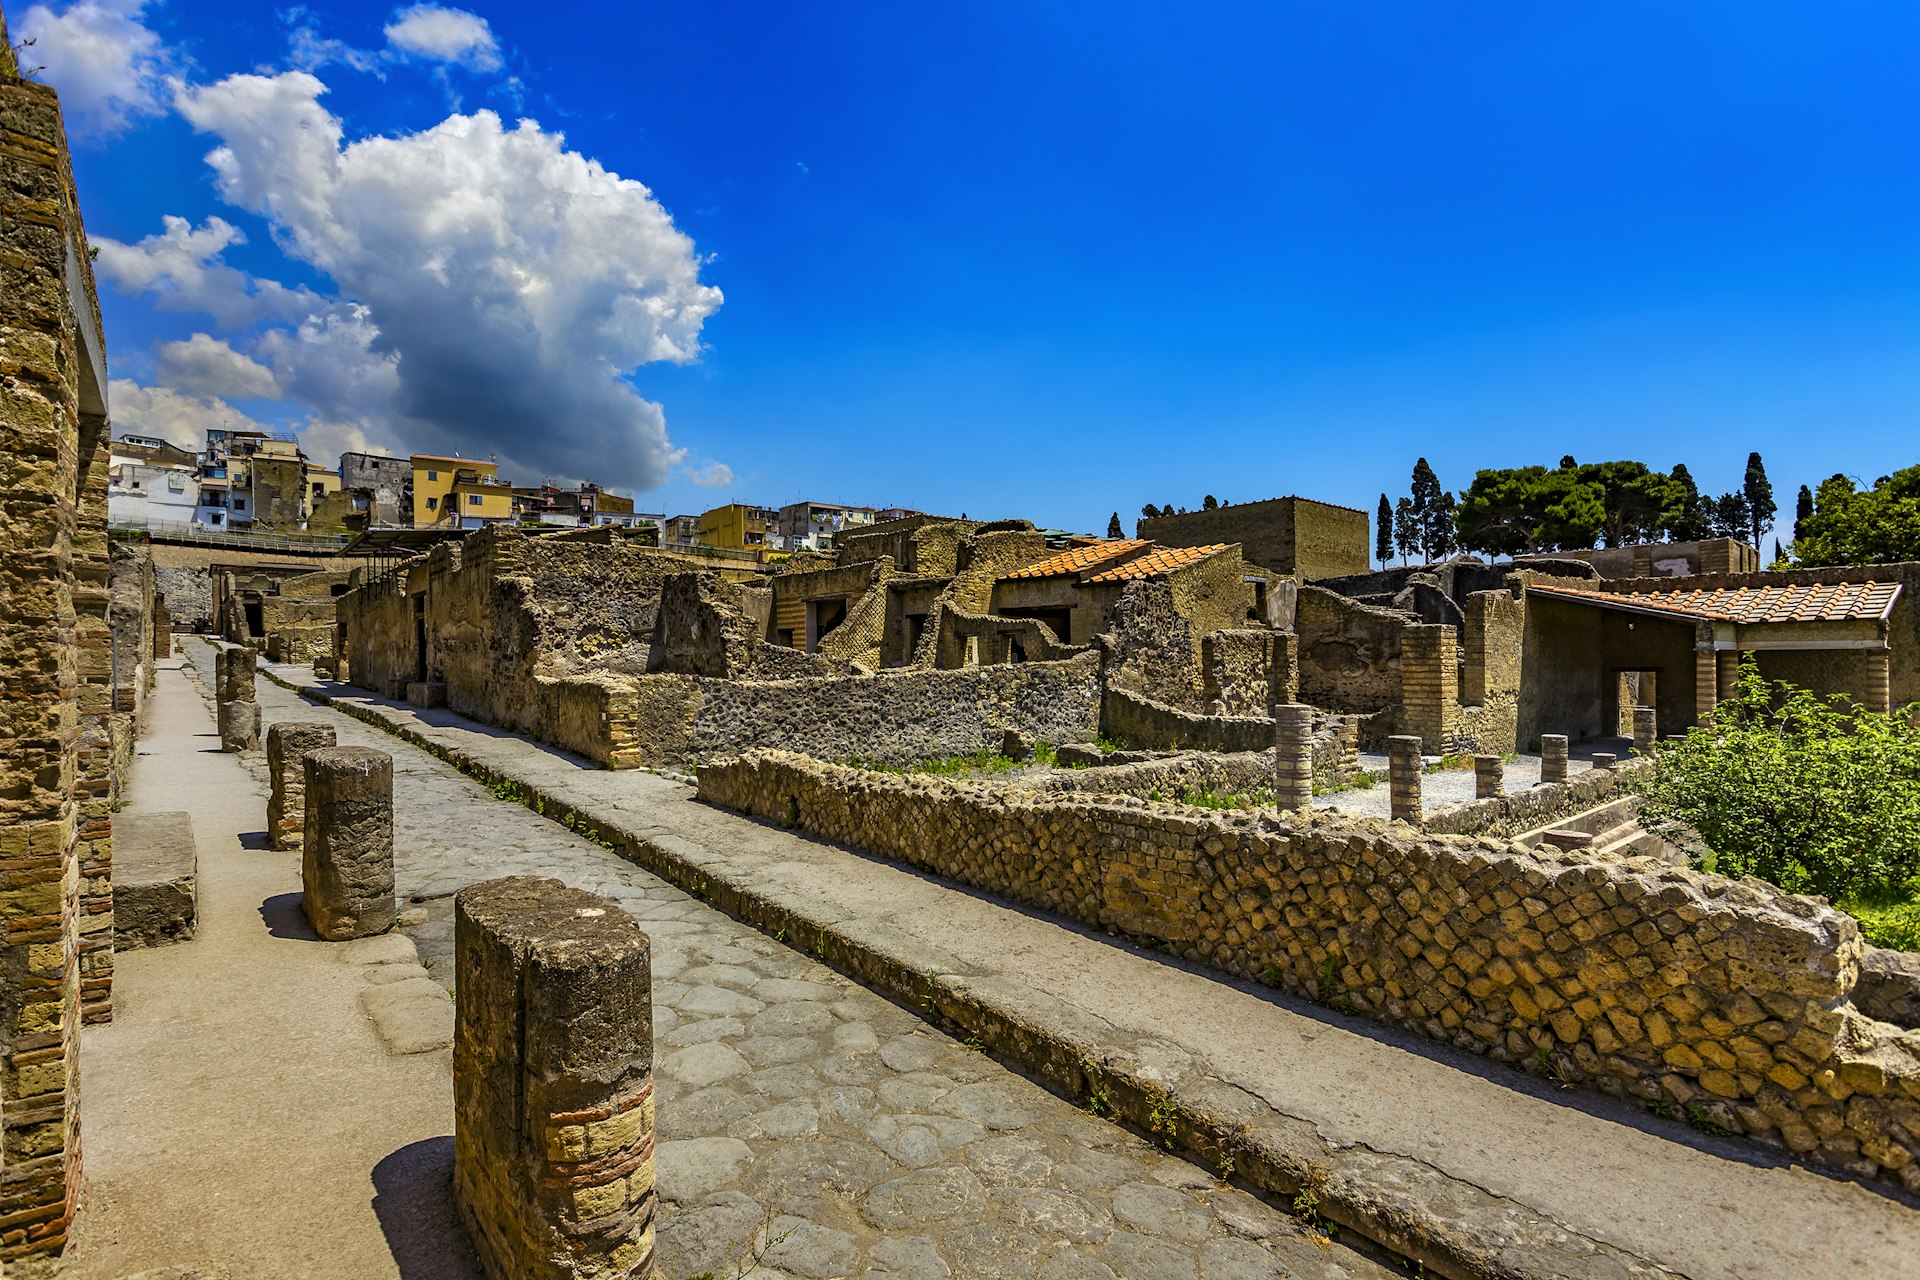 Ruined walls and pillars of the archaeological site at Herculaneum